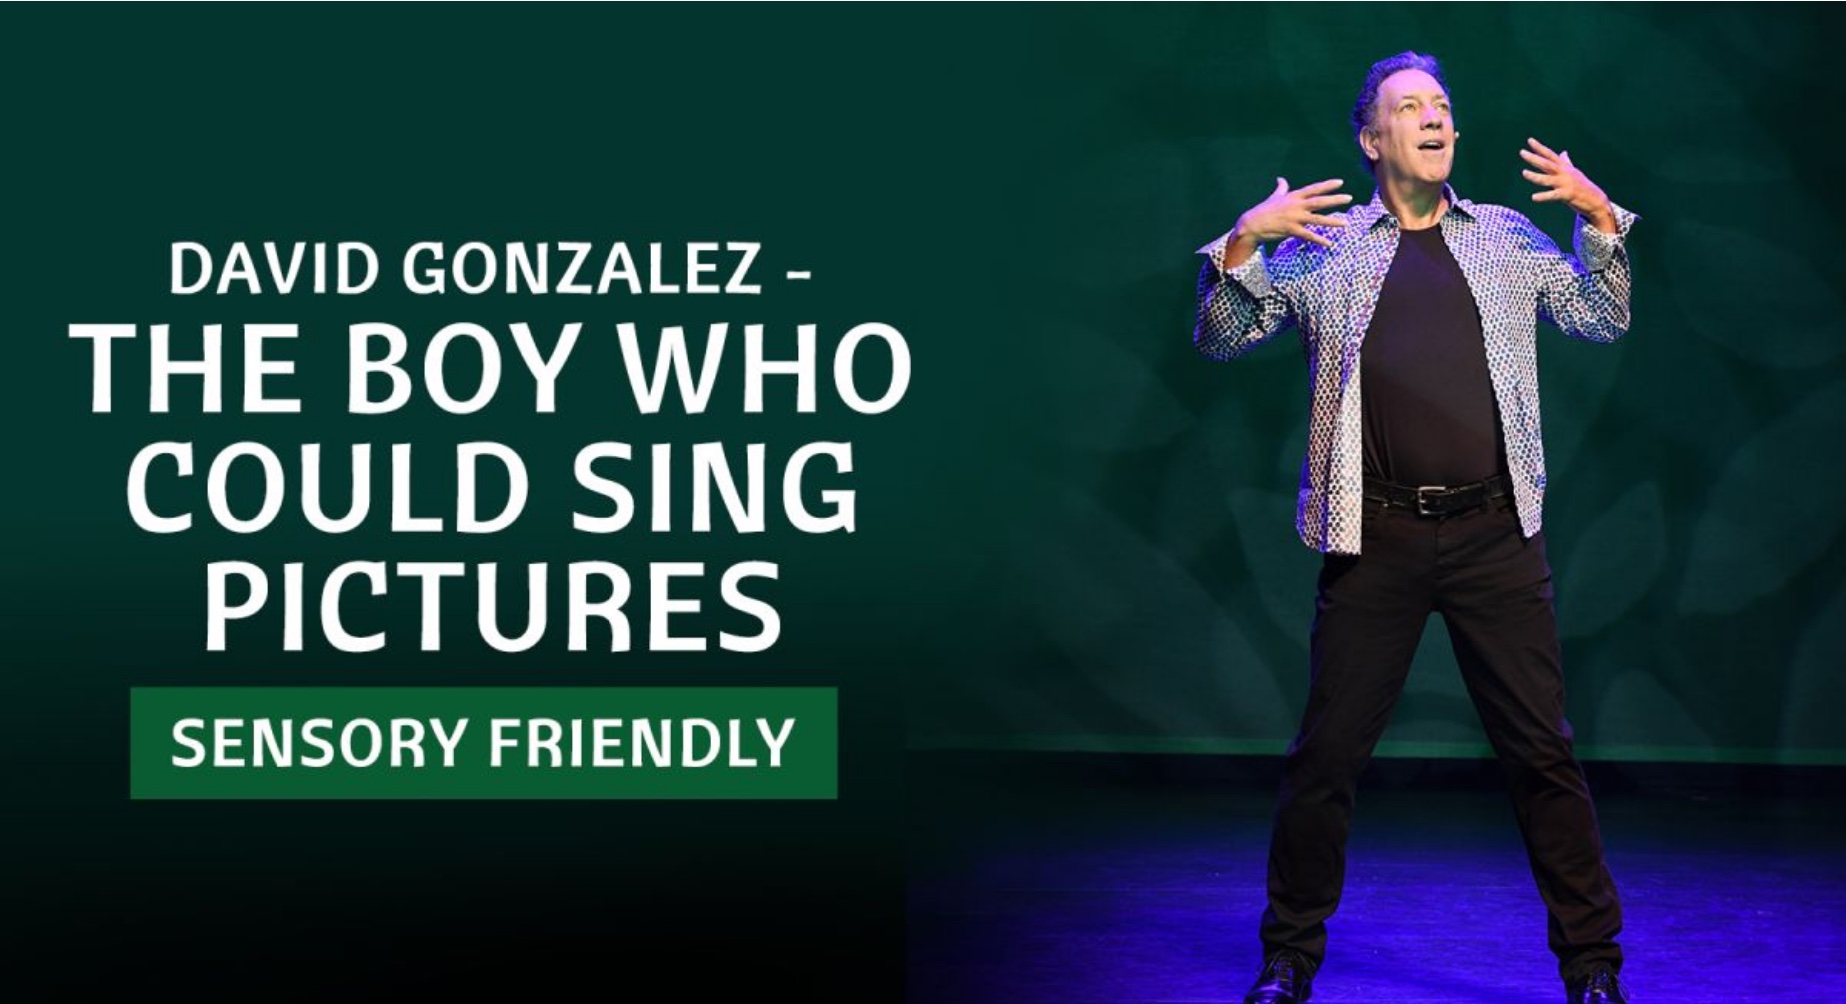 David Gonzalez: The Boy Who Could Sing Pictures at HEB Performance Hall